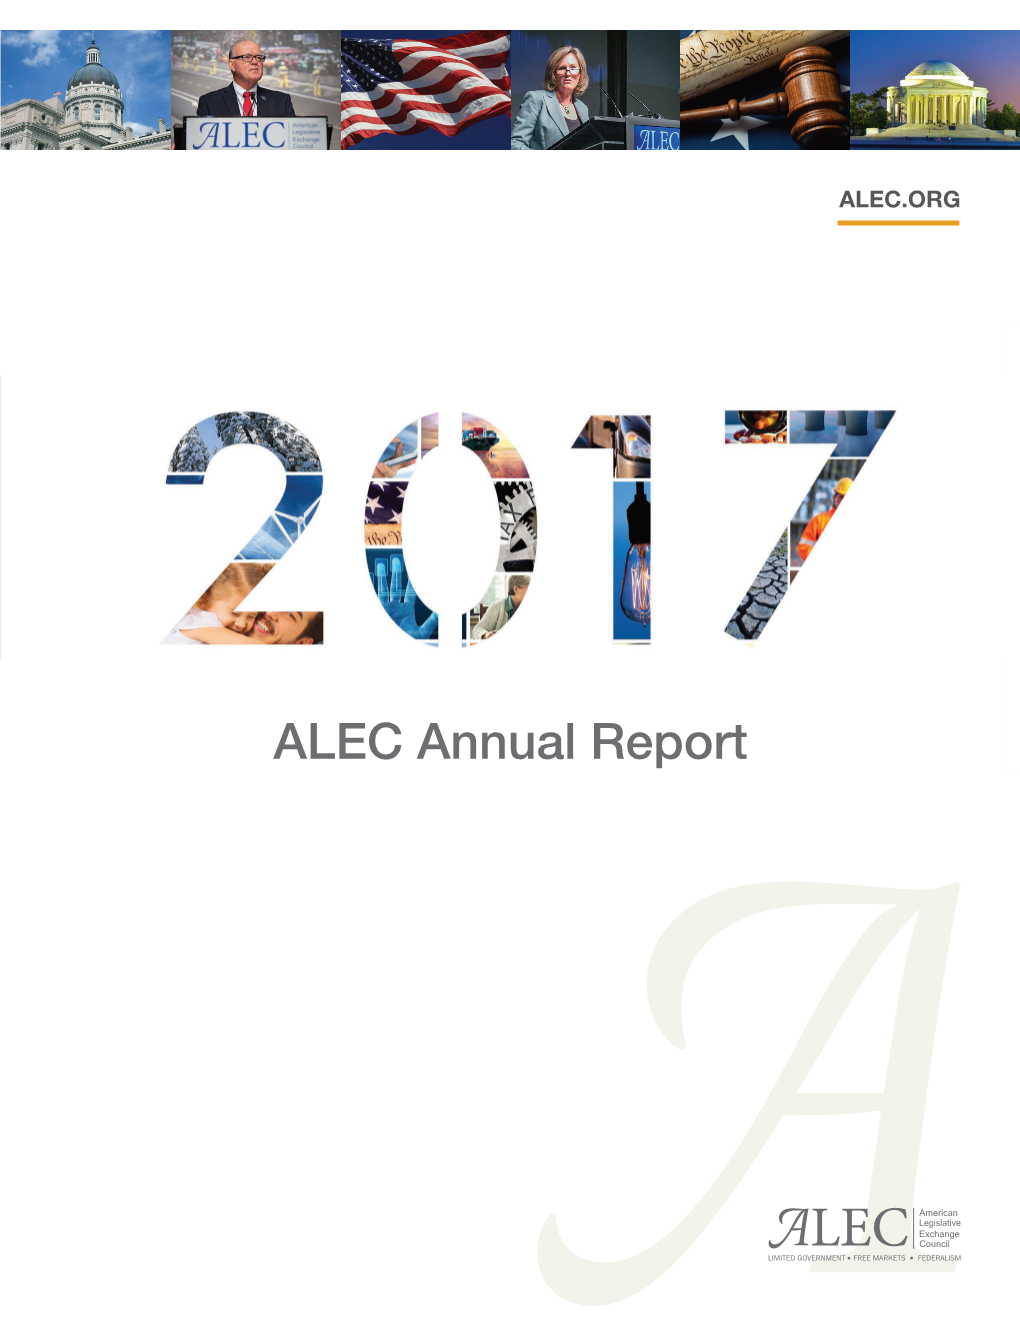 ALEC Annual Report LIMITED GOVERNMENT • FREE MARKETS • FEDERALISM 2017 ALEC Annual Report